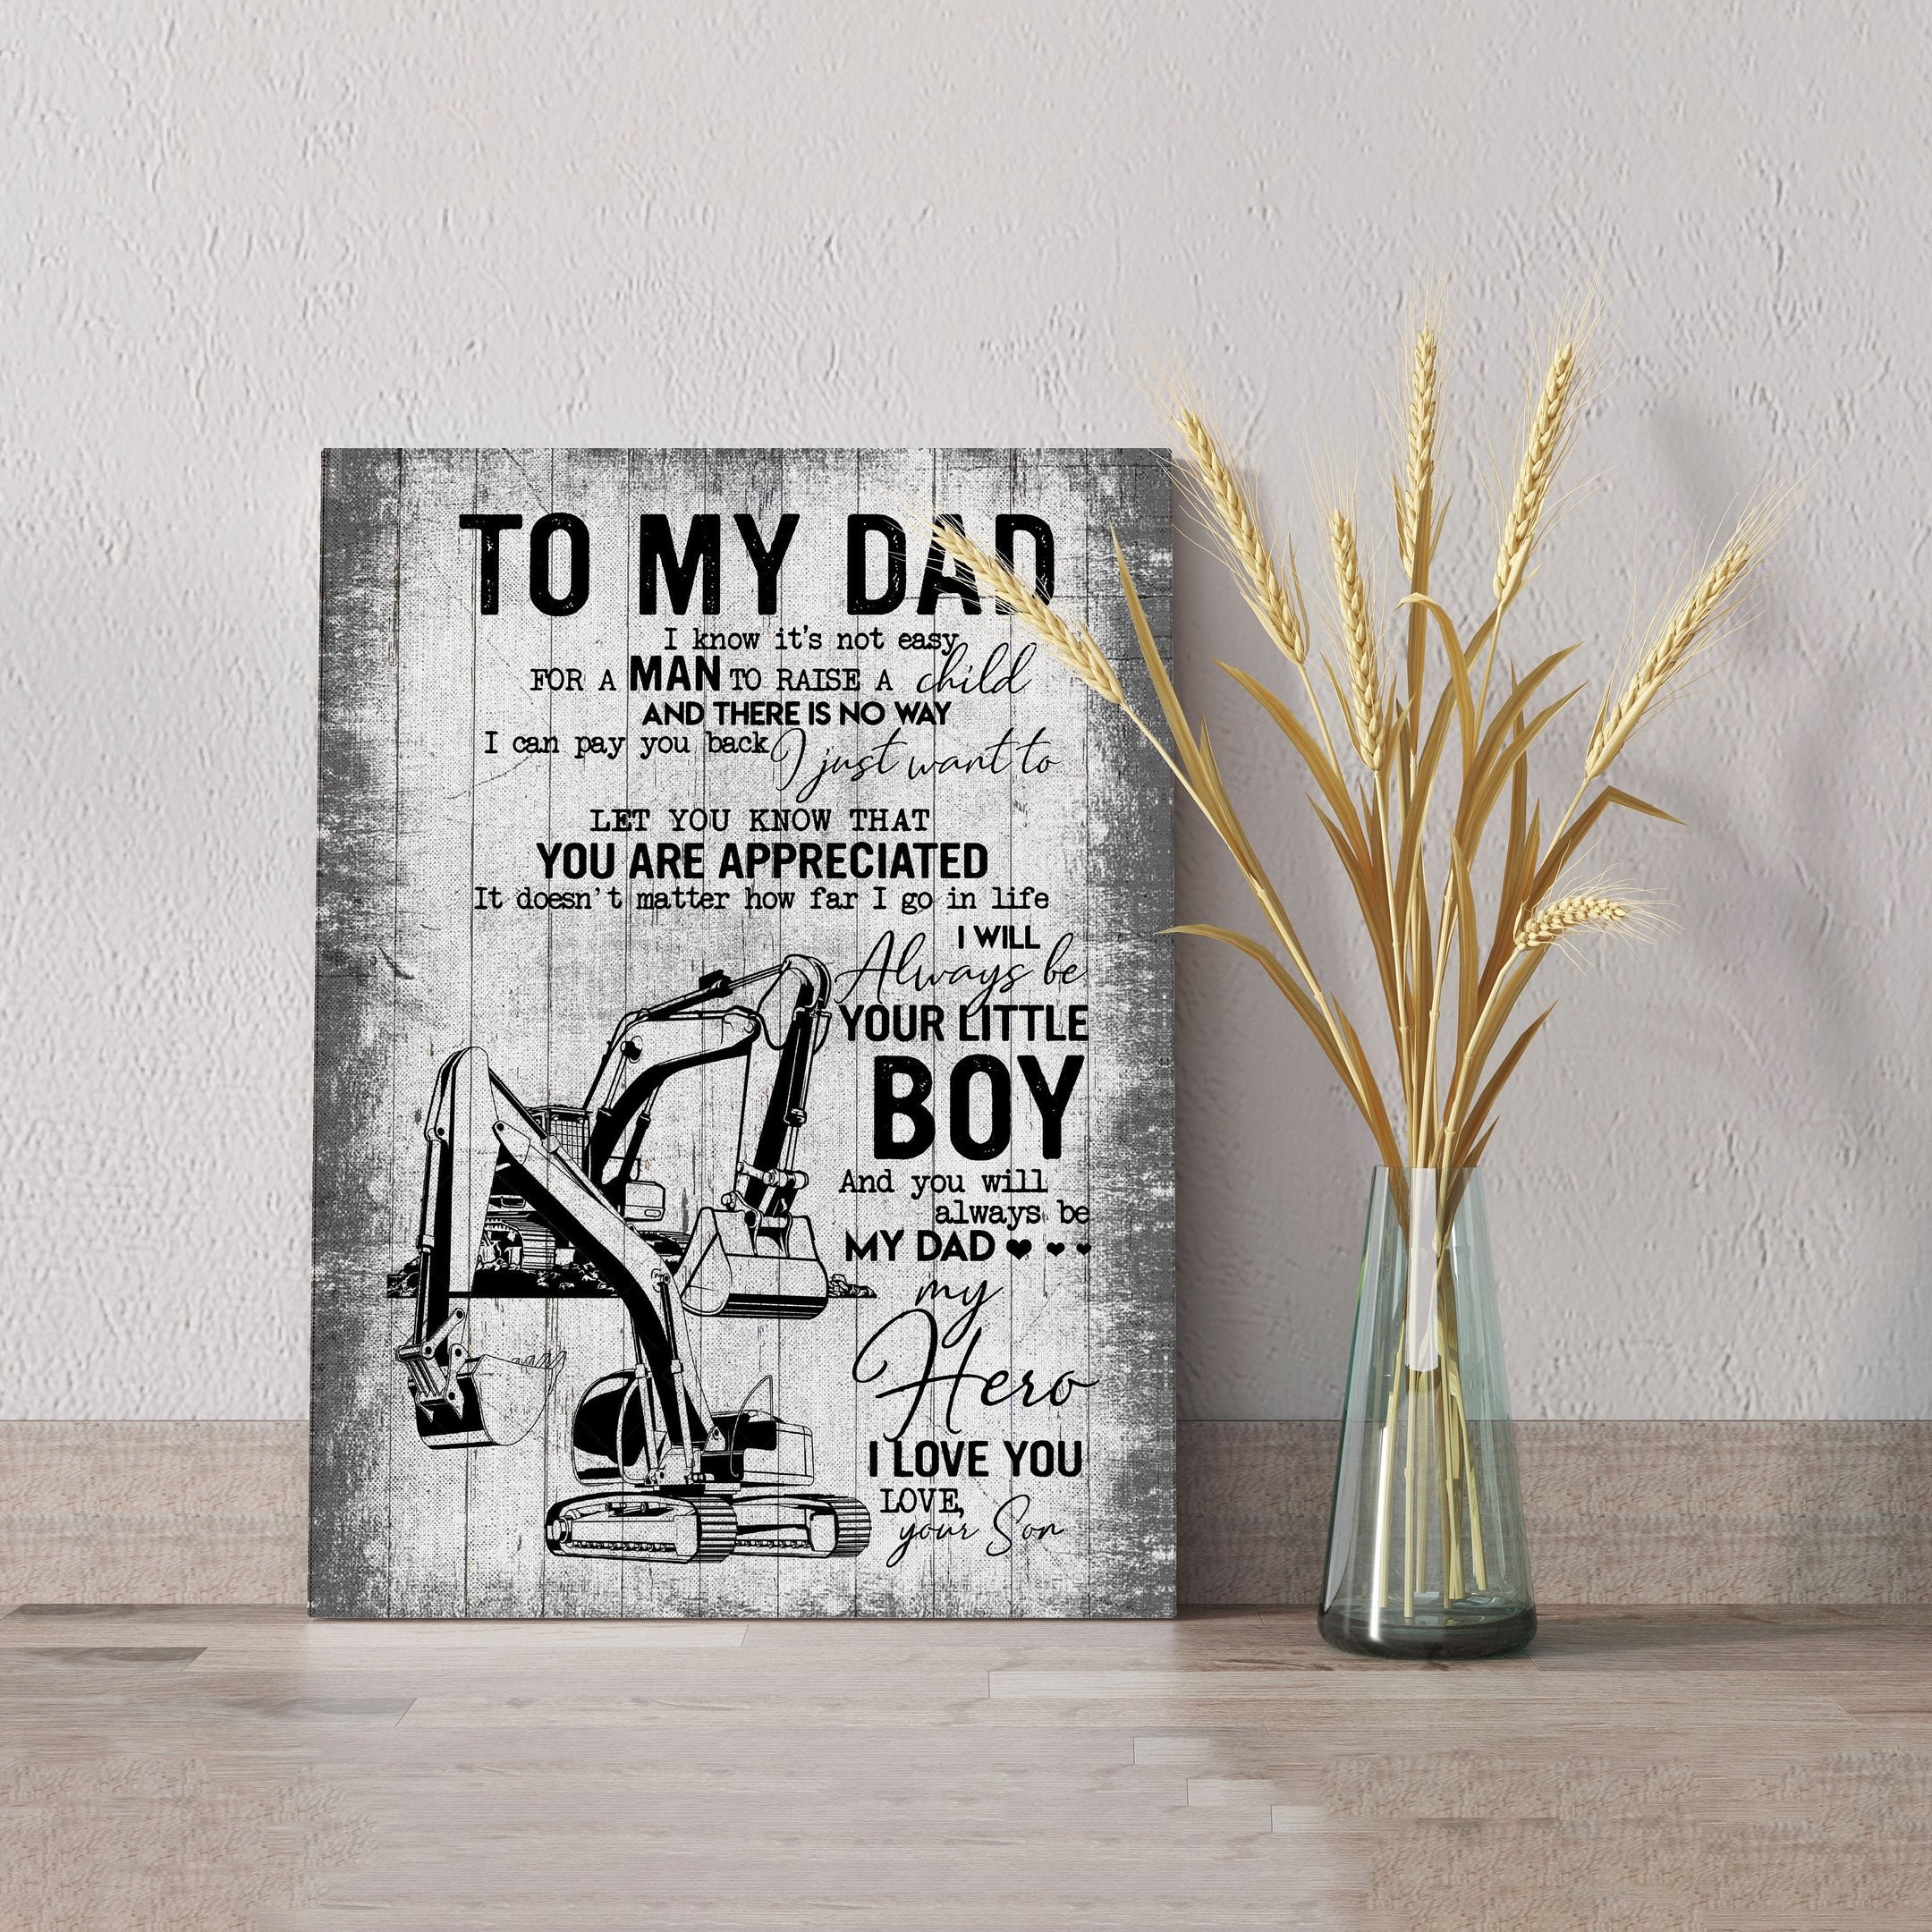 To My Dad Canvas, You Are Appreciated Canvas, From Your Son To Dad Canvas, Family Canvas – Canvas Prints, Gift Canvas